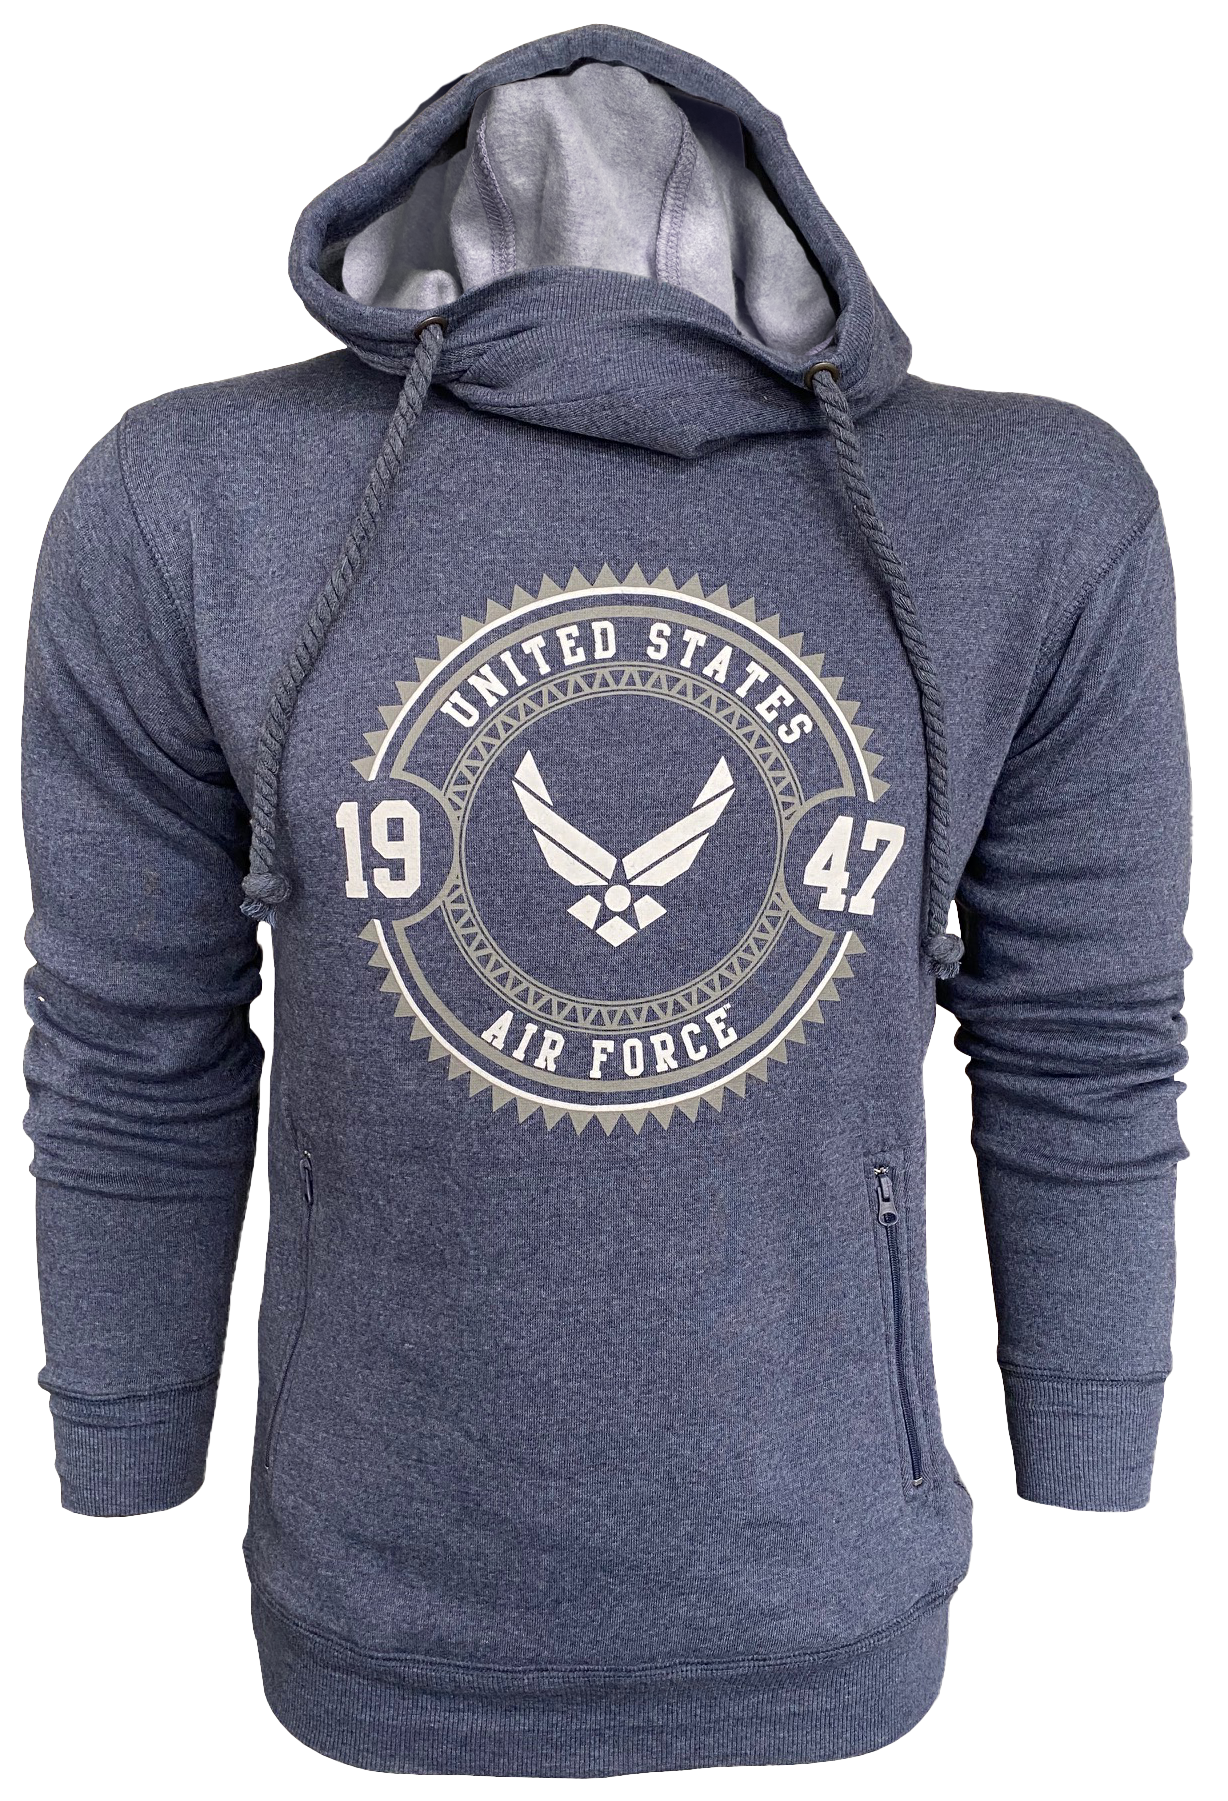 United States Air Force on Fleece Pullover